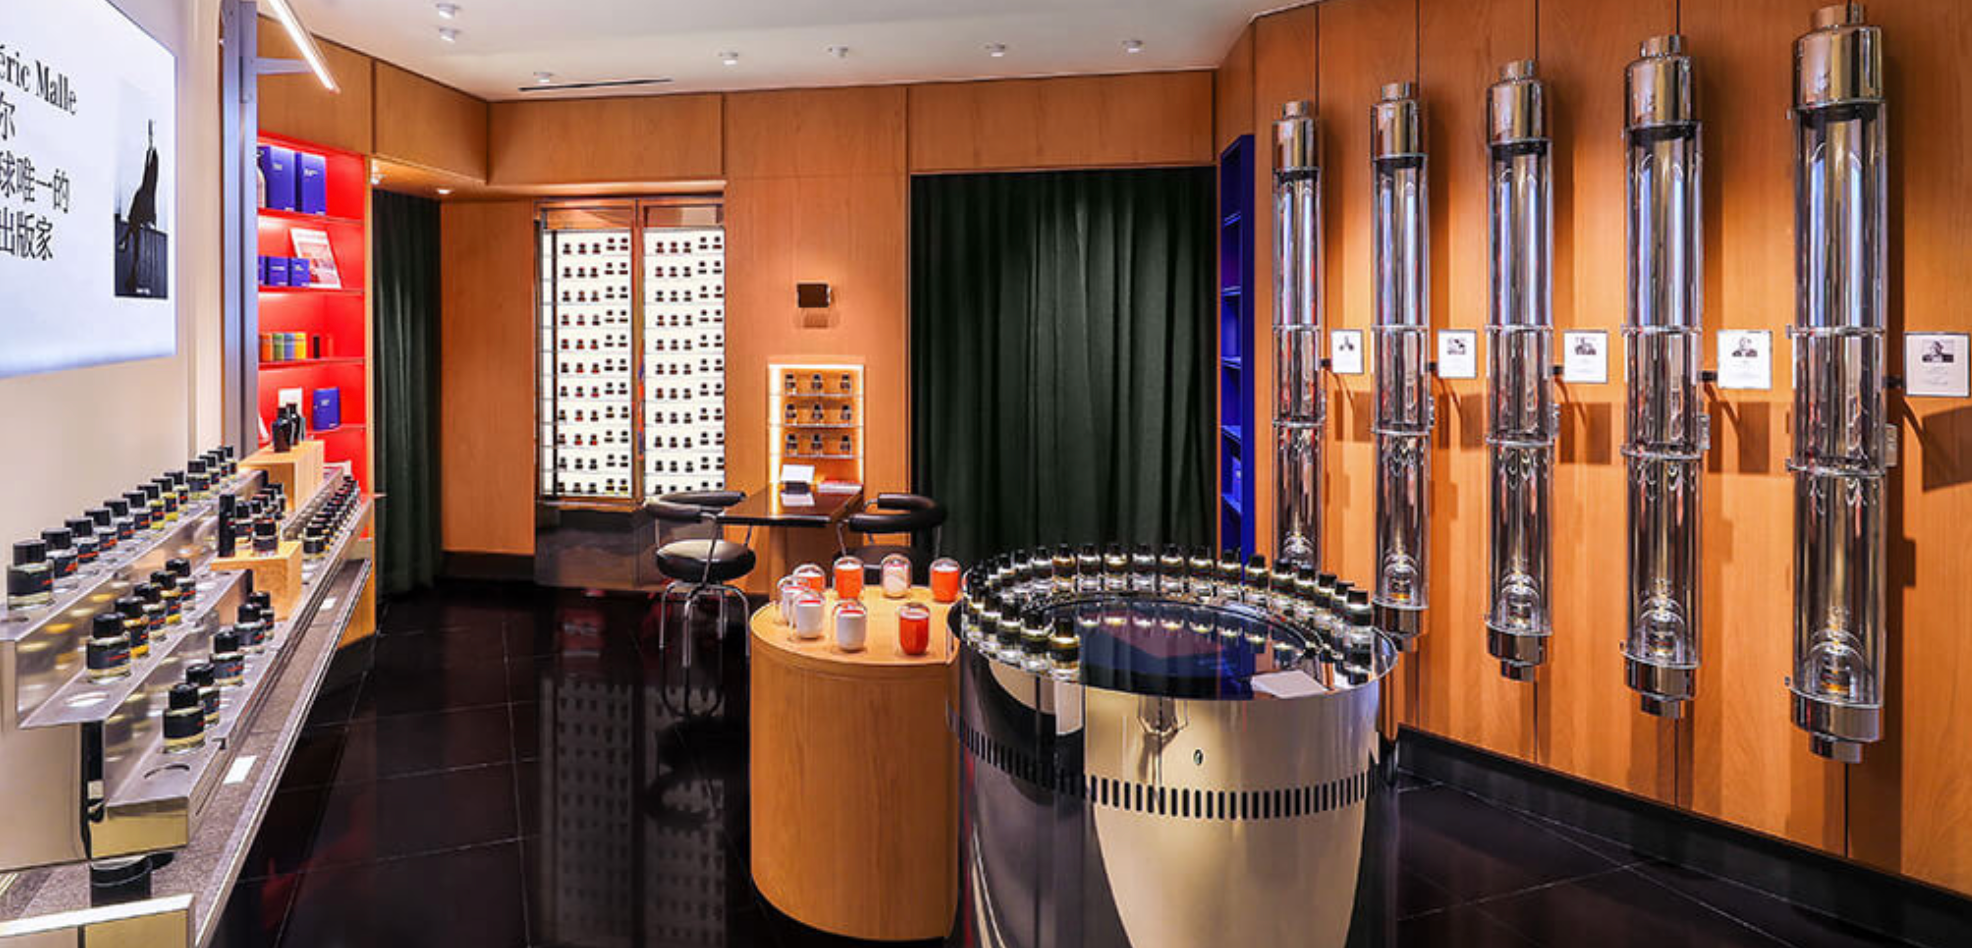 Inside Editions de Parfums Frédéric Malle’s first store in China. Image: Courtesy of Frederic Malle